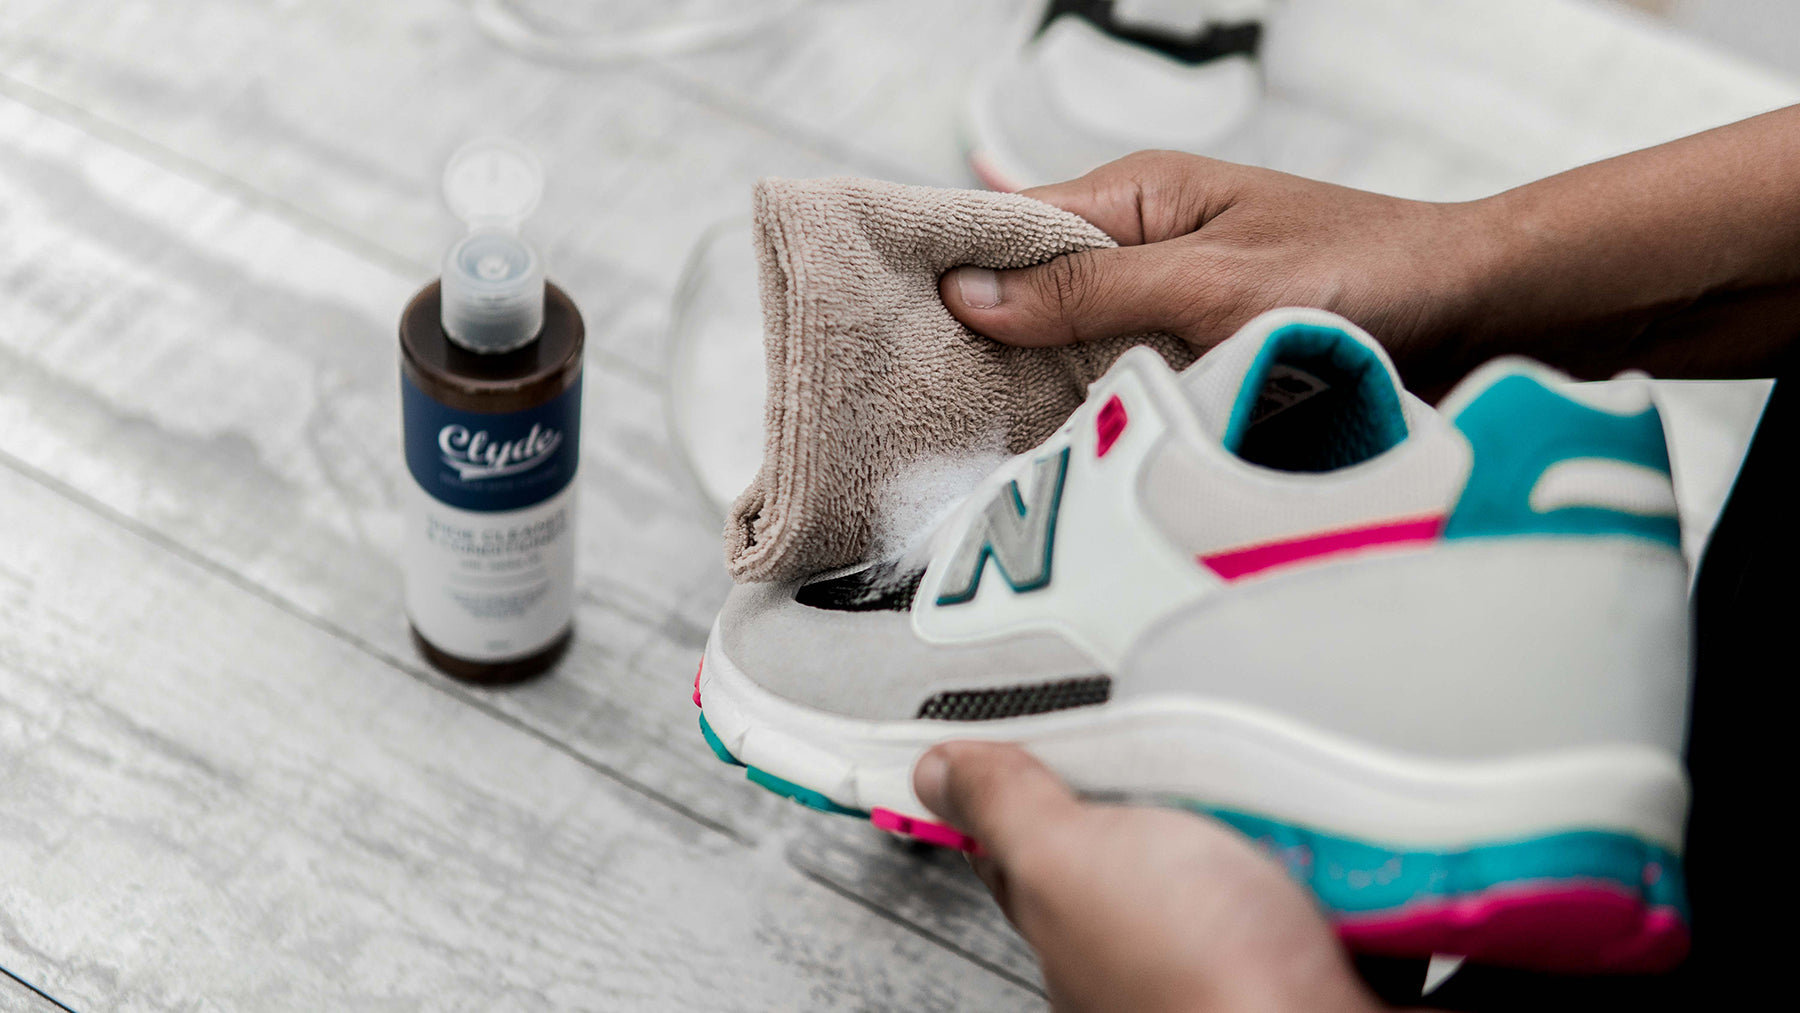 cleaning new balance shoes